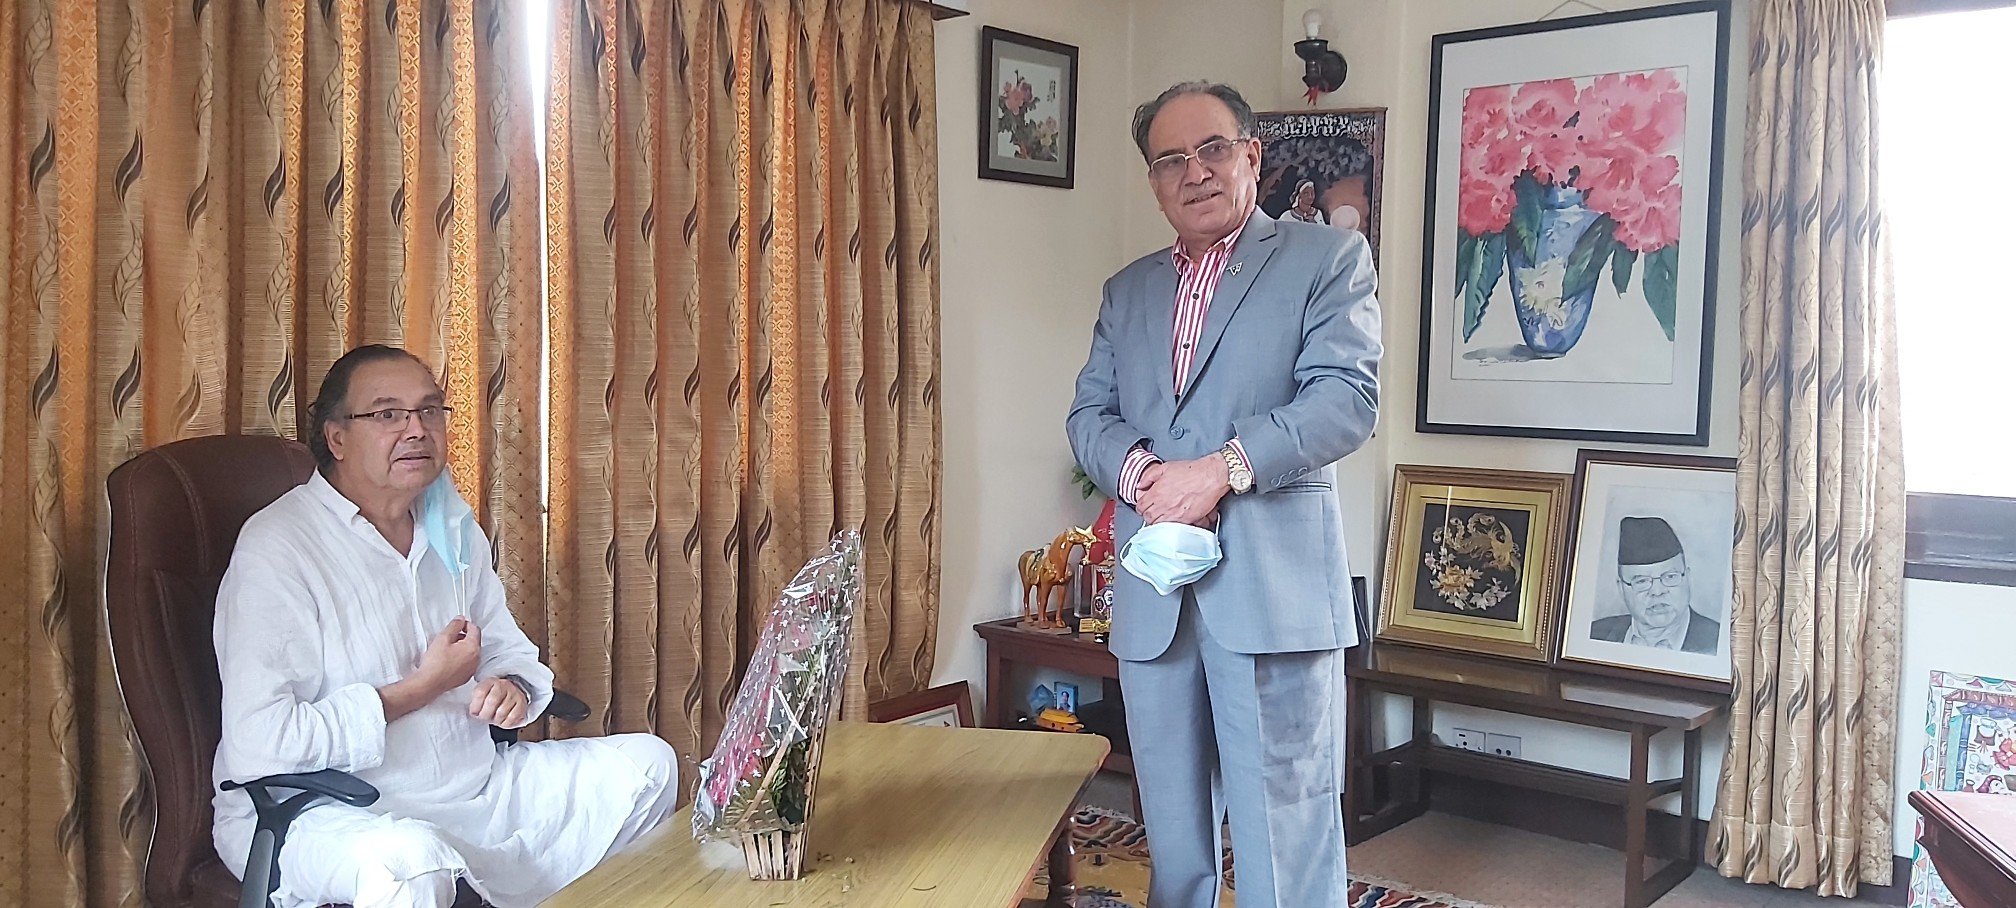 dahal-meets-khanal-with-get-well-soon-wishes